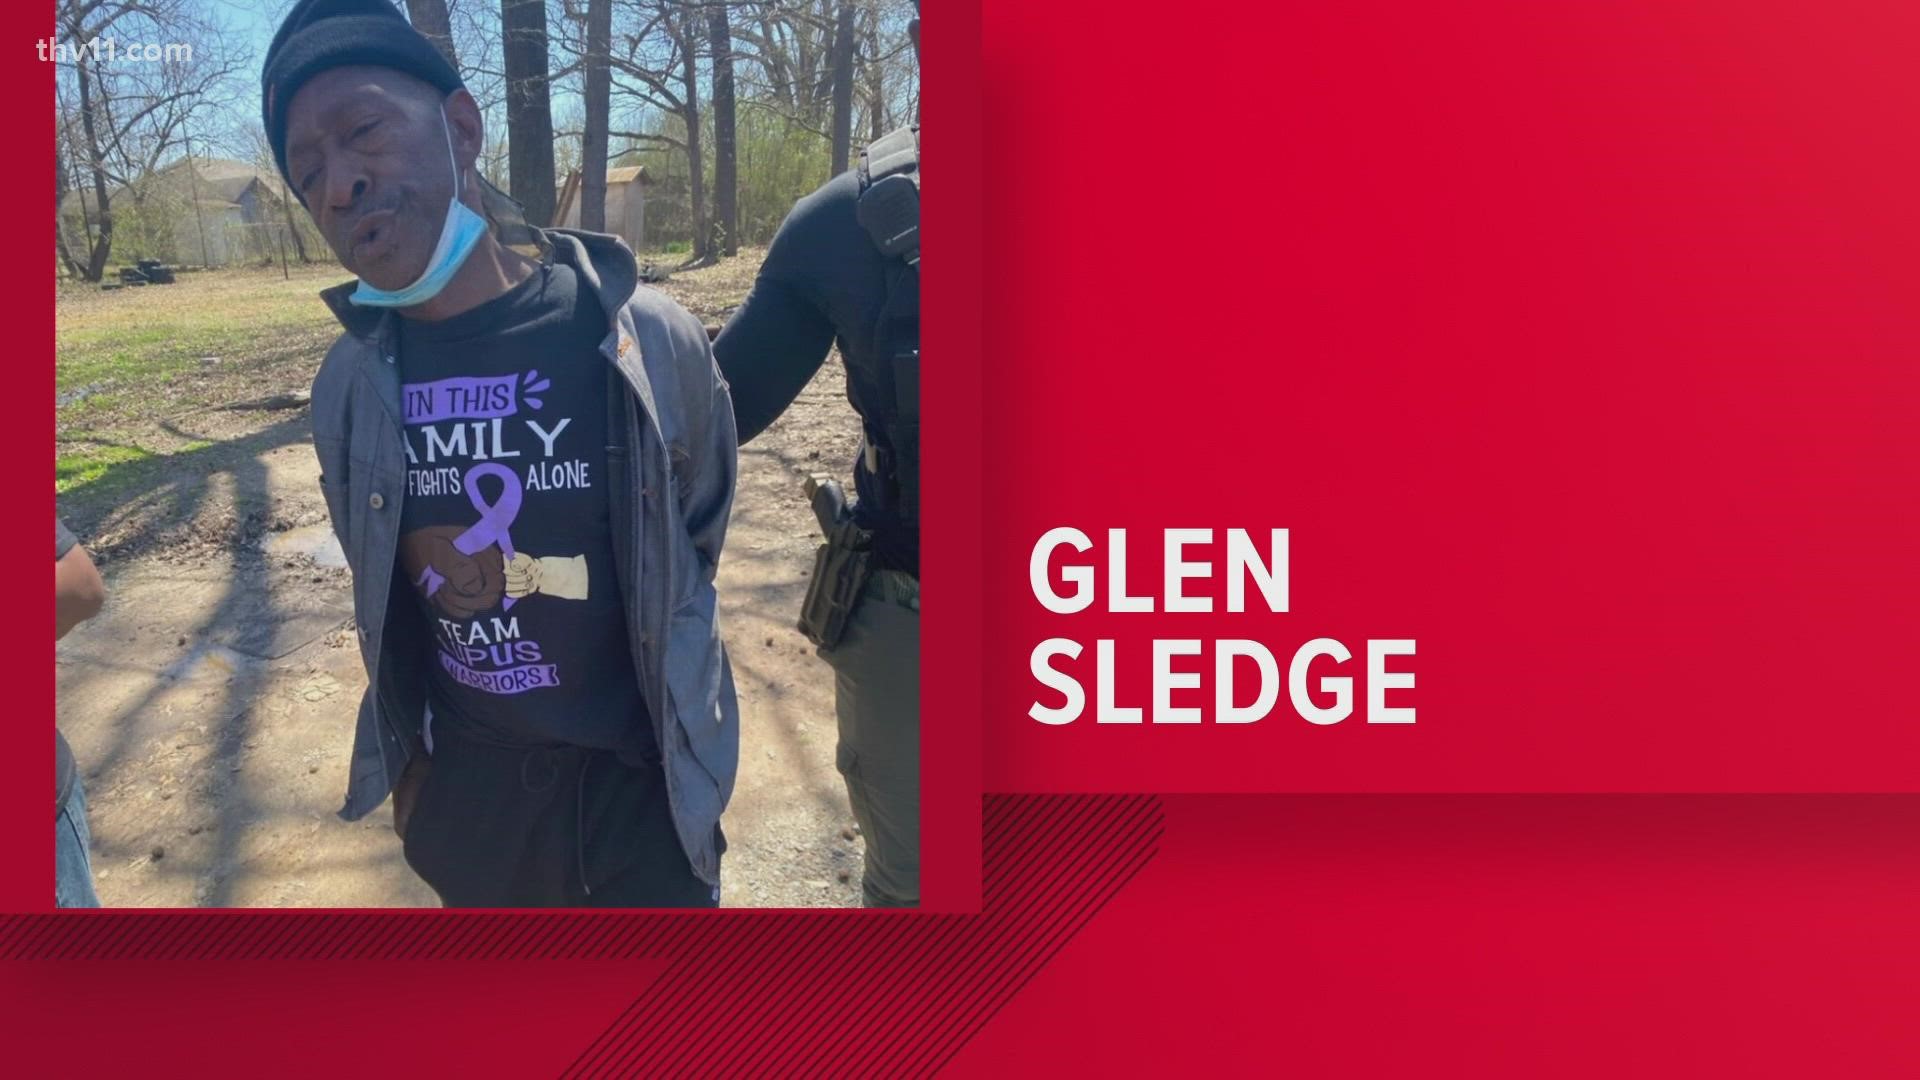 Arkansas deputies have arrested 57-year-old Glen Sledge for homicide and 66-year-old Clyde Poplar in connection to the case.